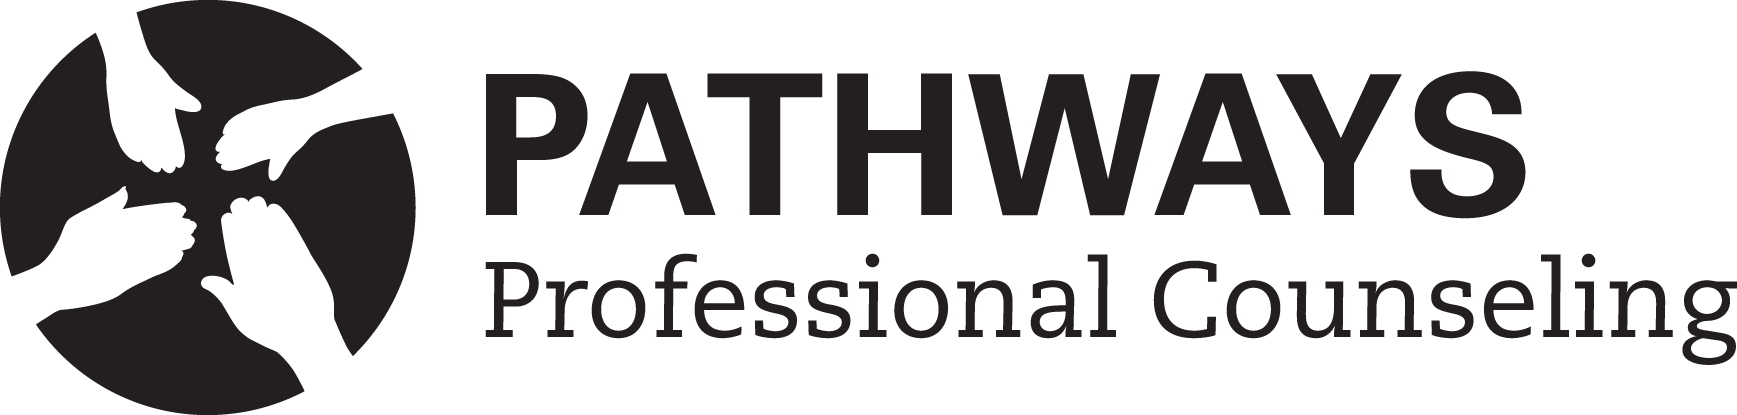 Pathways Professional Counseling